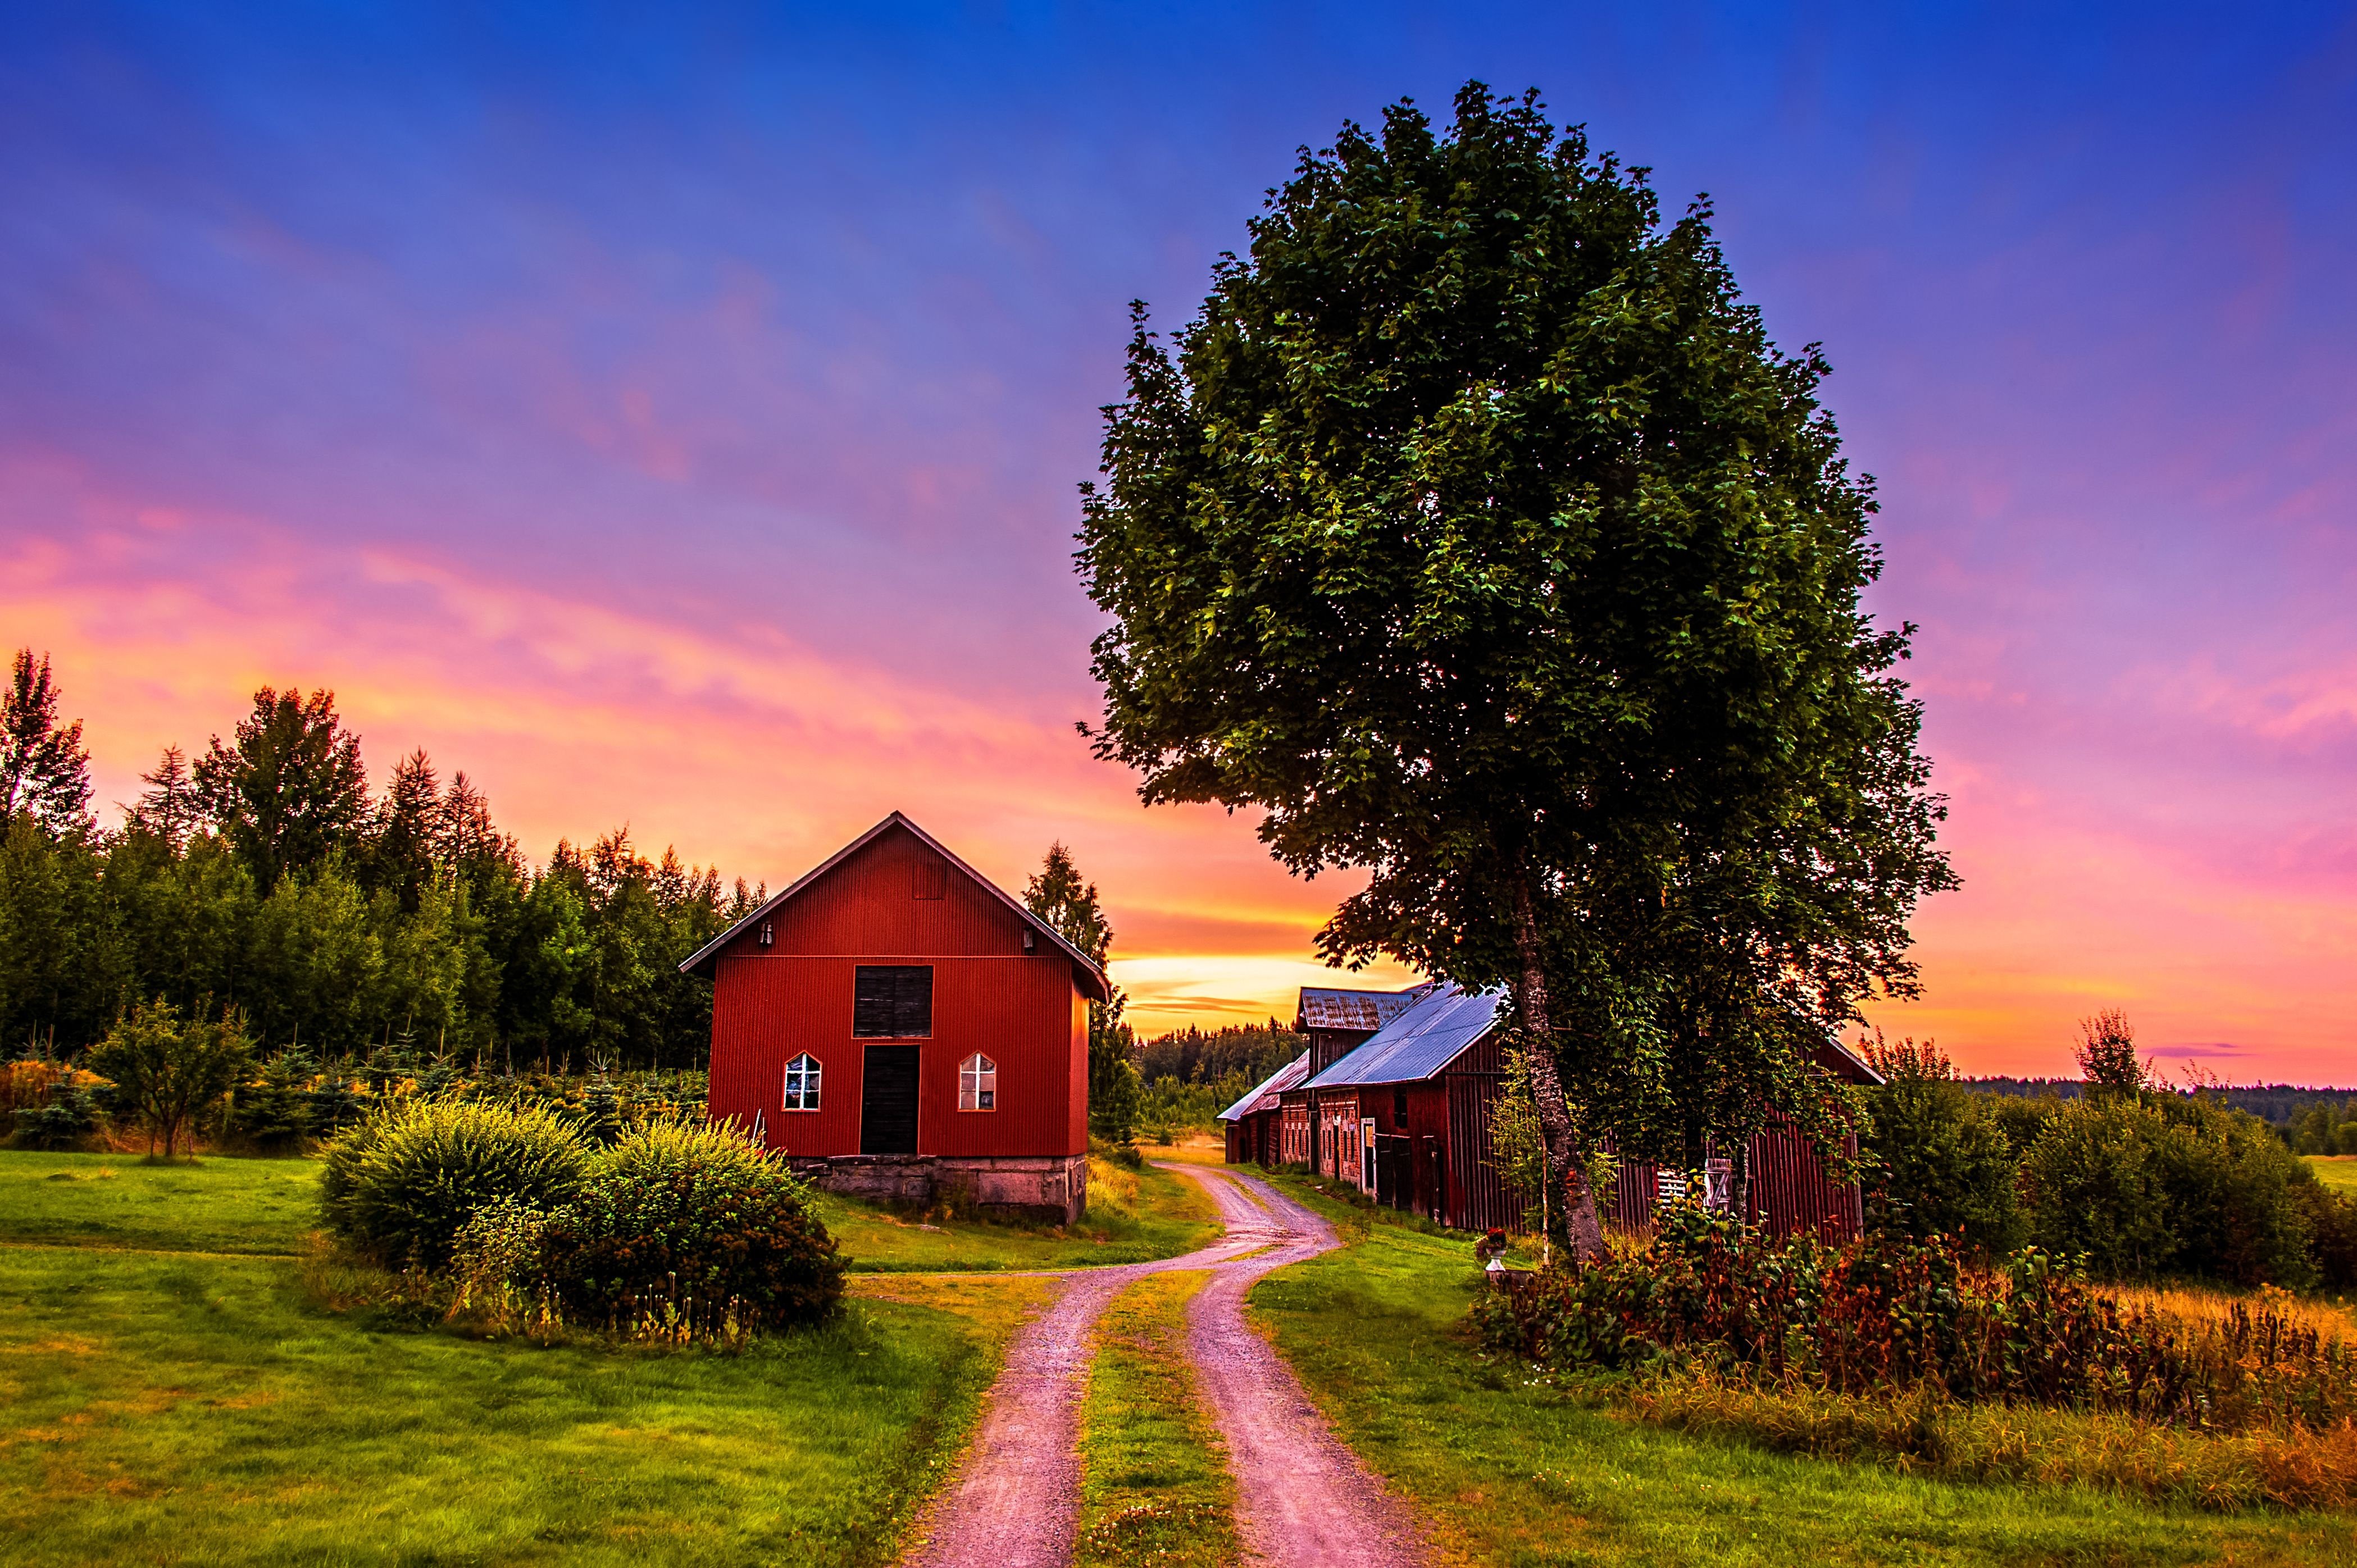 Sunset, Trees, Road, Home, Landscape, Rustic, Farm, House Wallpapers Hd